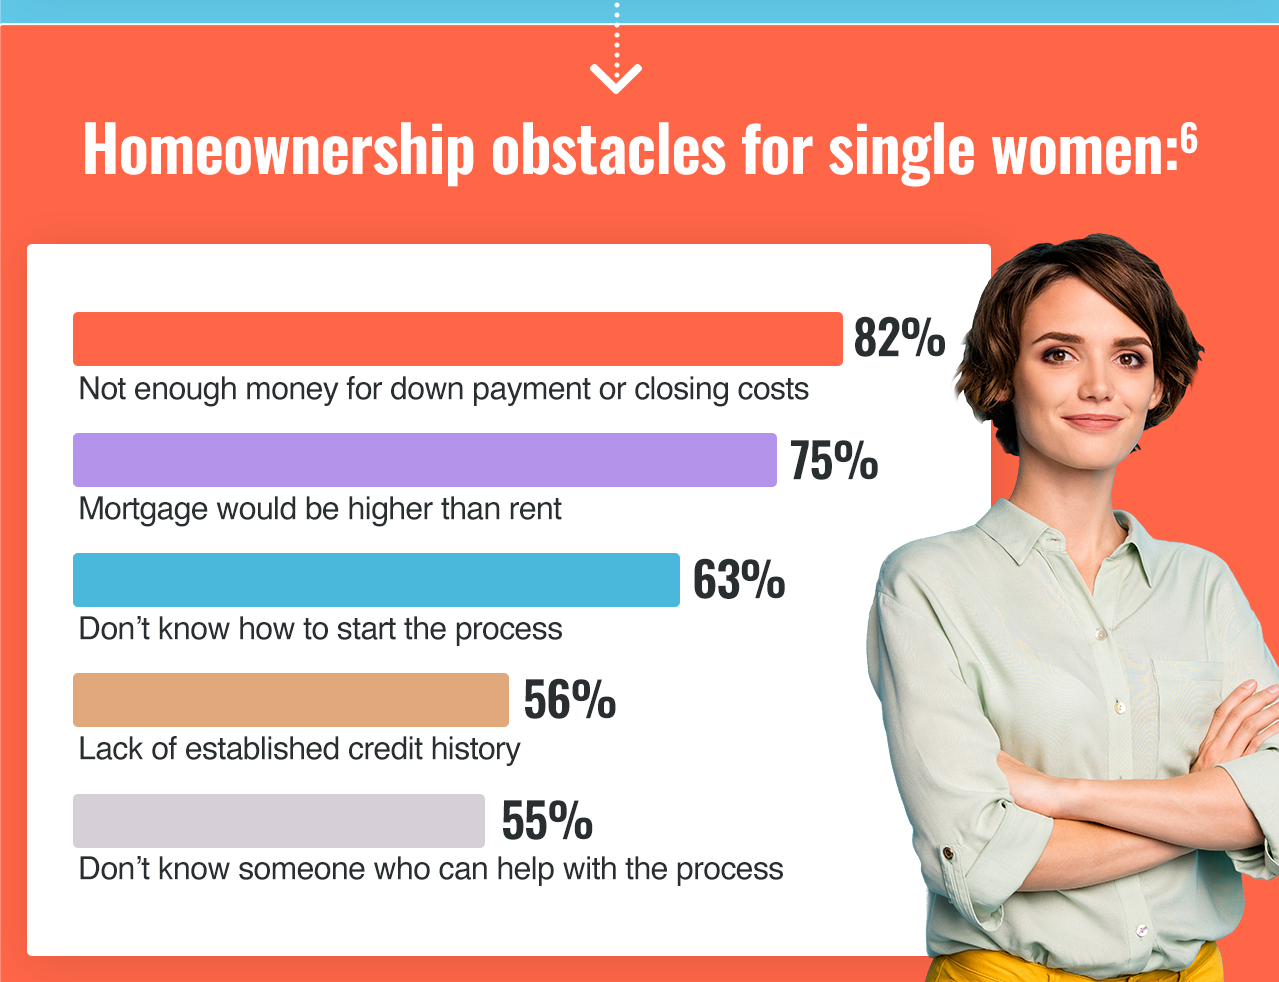 Homeownership obstacles for single women include not enough money for downpayment or closing closts, mortgage would be higher than rent and don't know how to start the process[6]